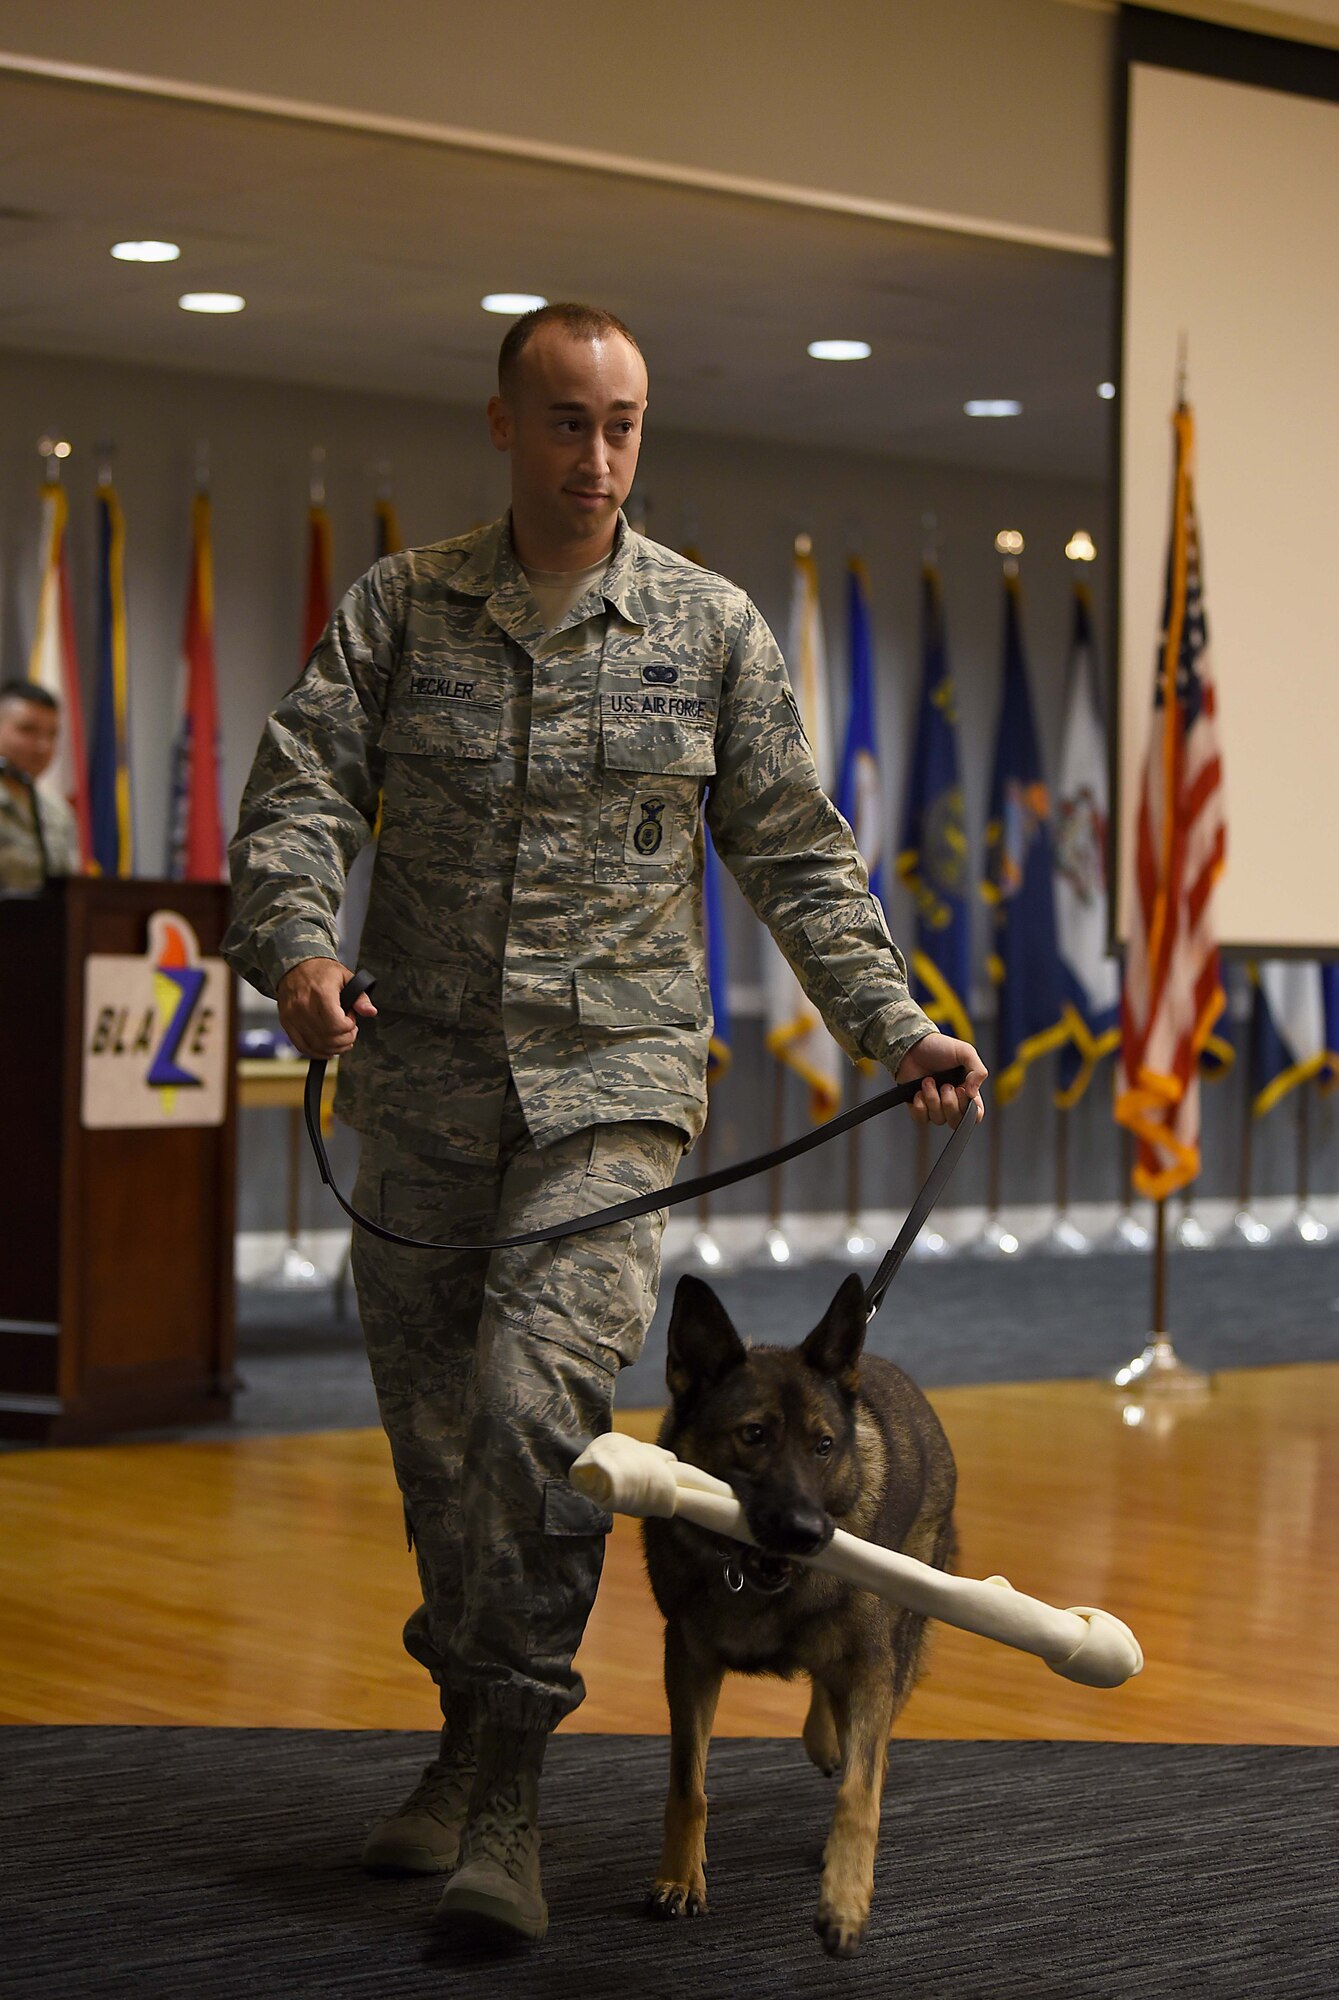 Staff Sgt. Nicholas Heckler, former 14th Security Forces Squadron military working dog handler, walks with newly retired MWD Cherry, during her retirement ceremony Aug. 24, 2018, on Columbus Air Force Base, Mississippi. Cherry retired after serving the Air Force for 10 years Cherry as an explosive detector dog. (U.S. Air Force photo by Airman 1st Class Keith Holcomb)